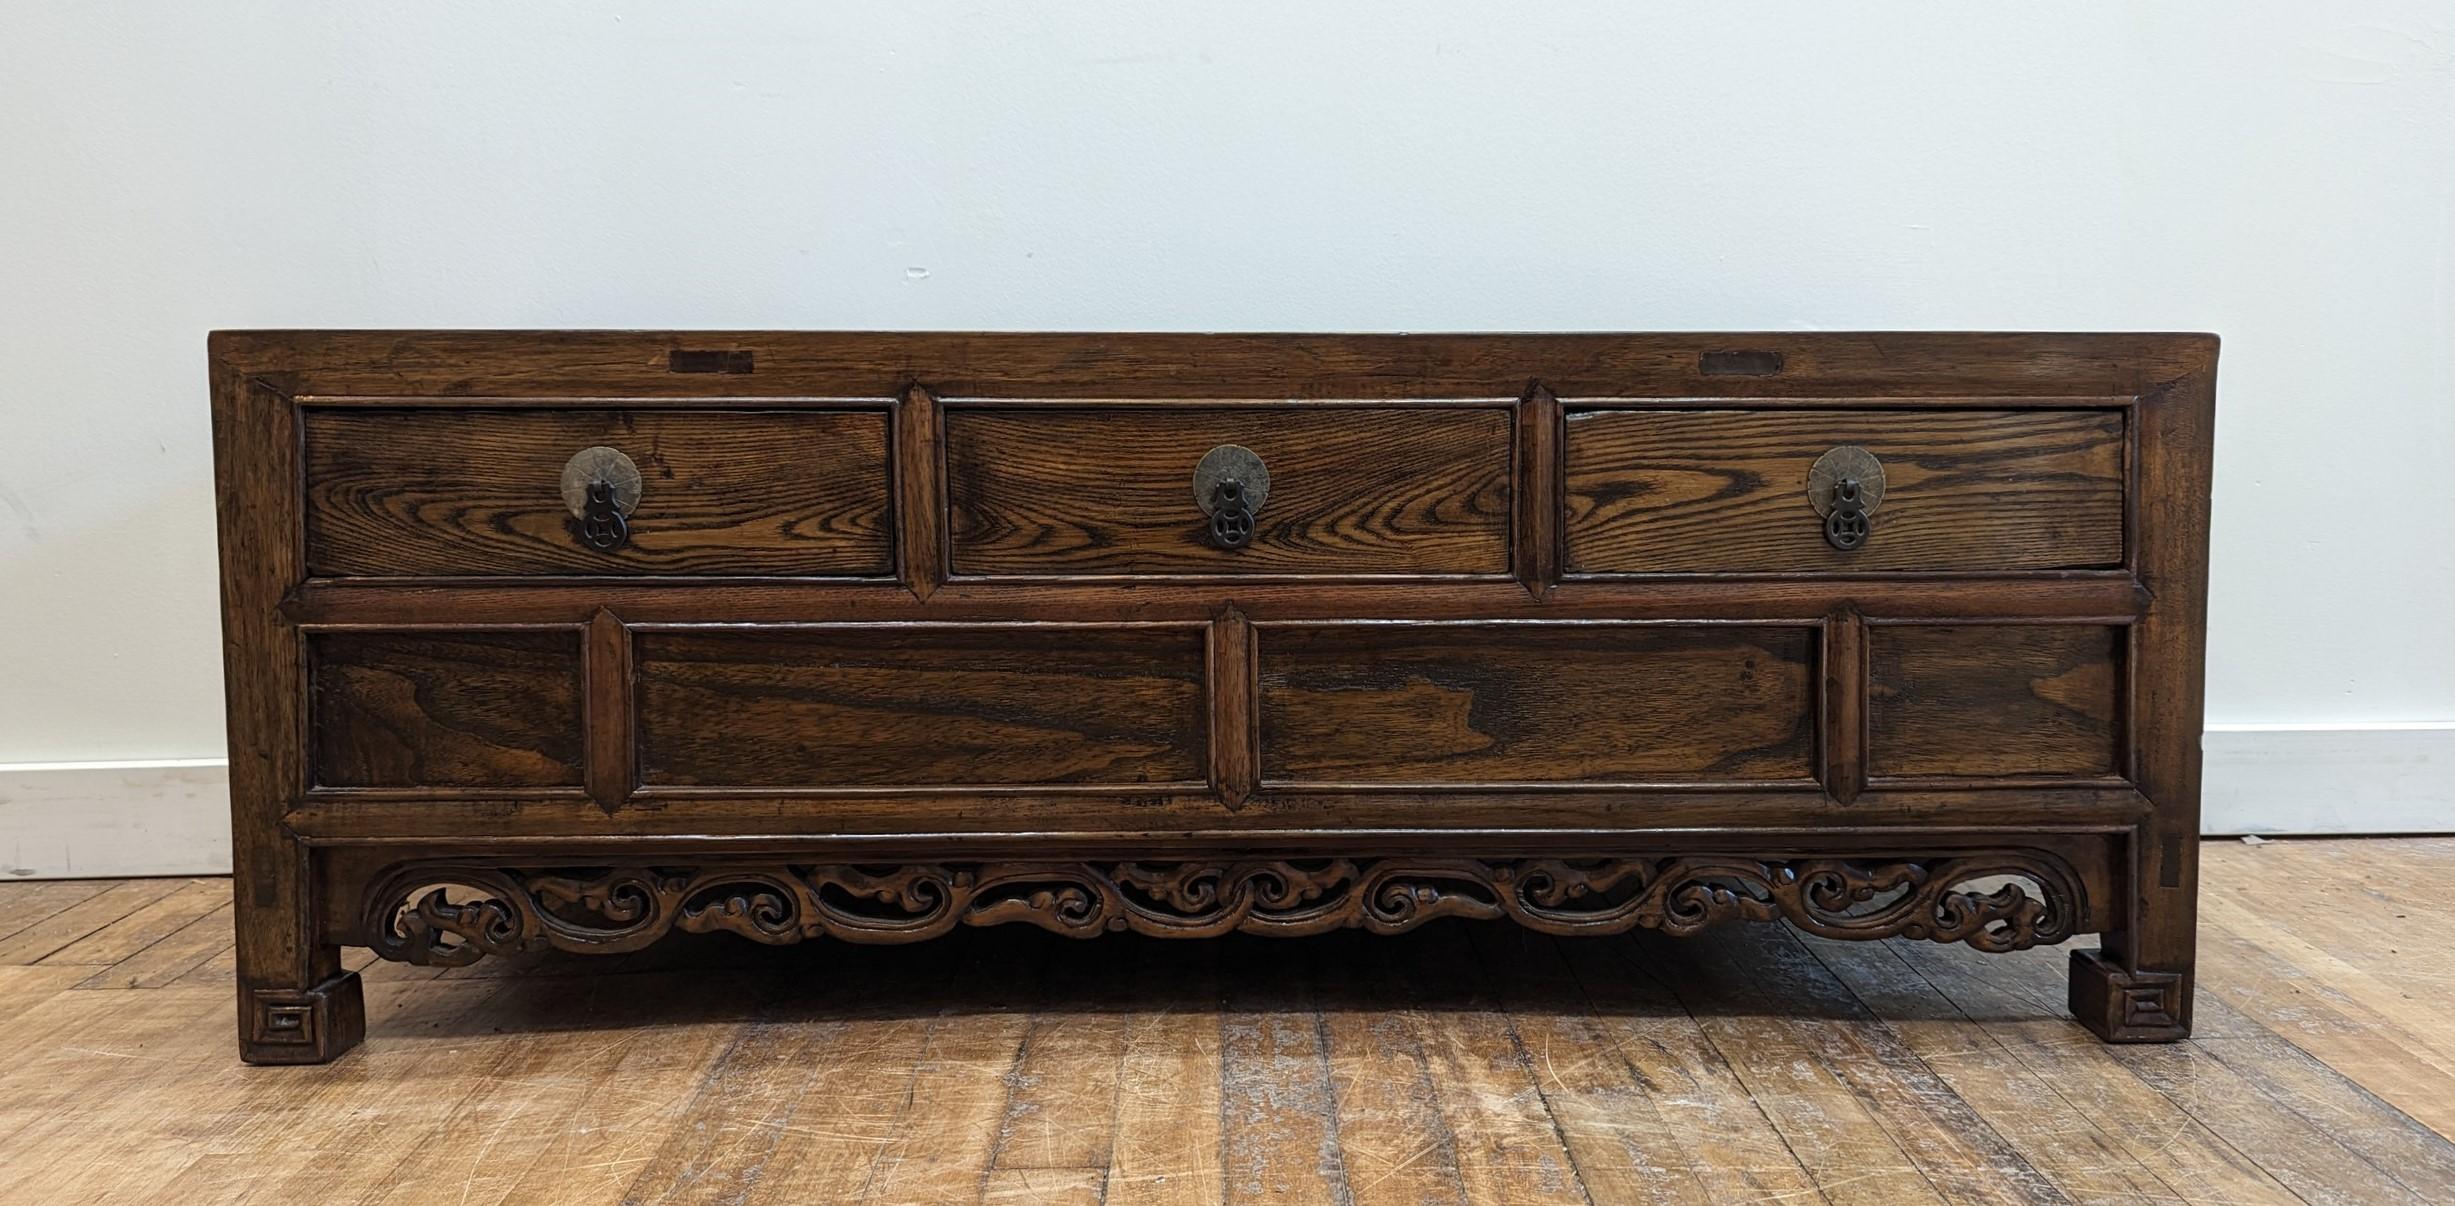 Antique Low Table with three drawers.  Very nice Elm wood low table coffer with drawers, keyed horse hoof feet with a beautiful carved apron.  Wonderful antique low table capable of being used as cocktail table, coffee table, media TV stand, of low